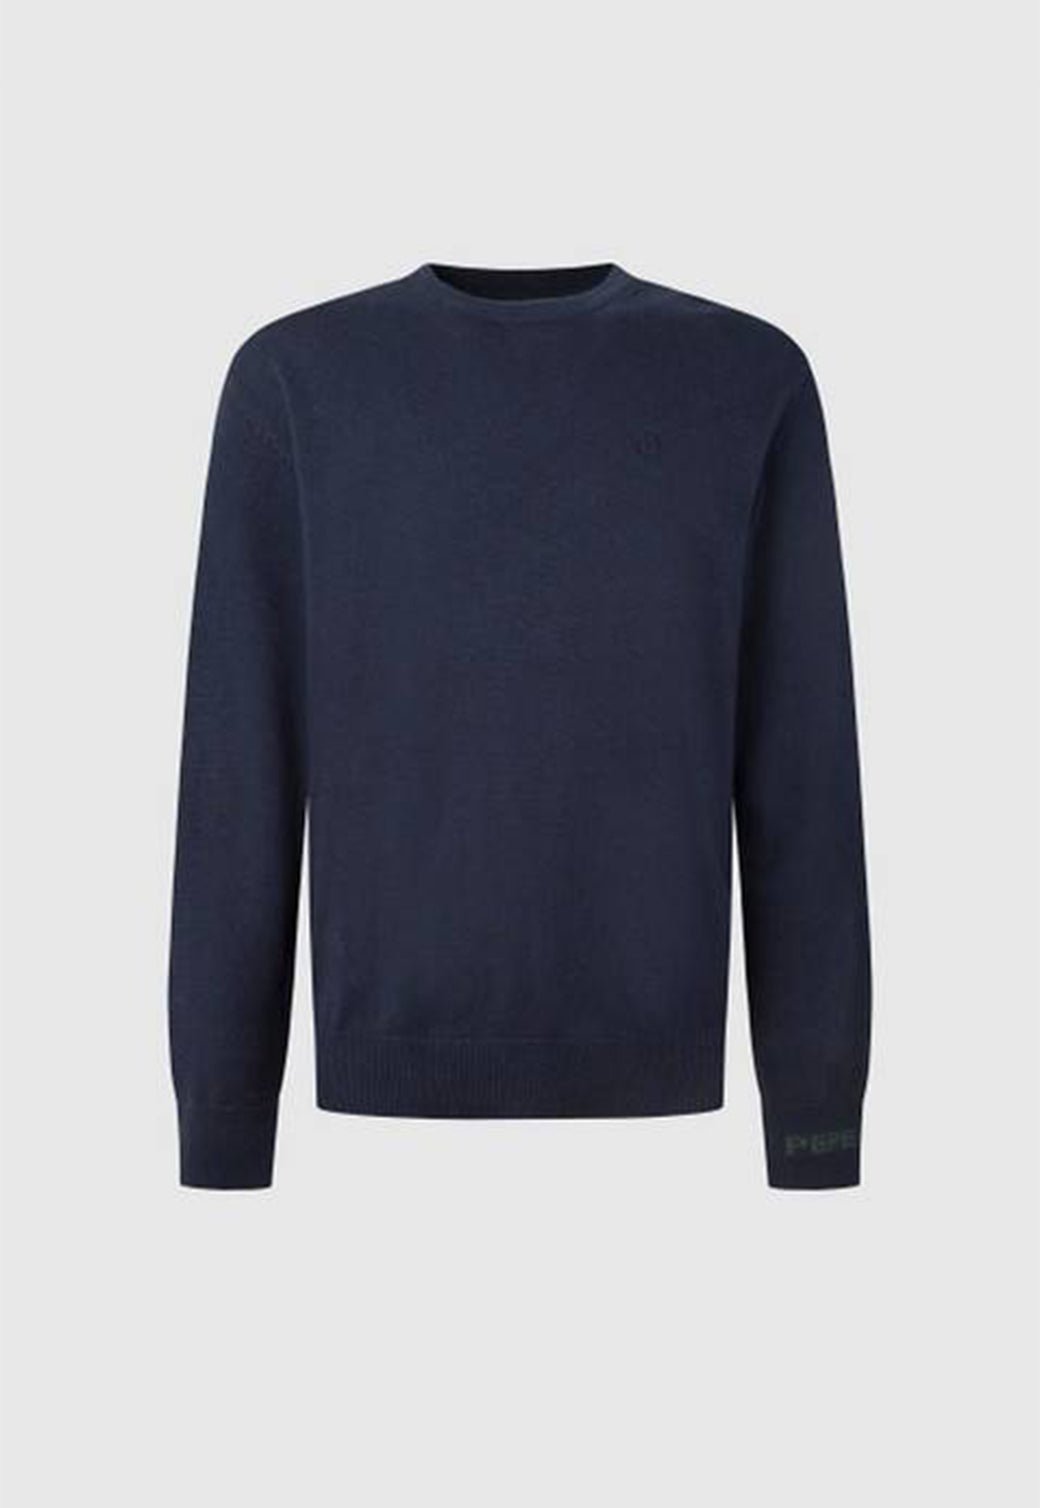 ANDRE CREW NECK 594DULWICH PM702240 - Pepe Jeans